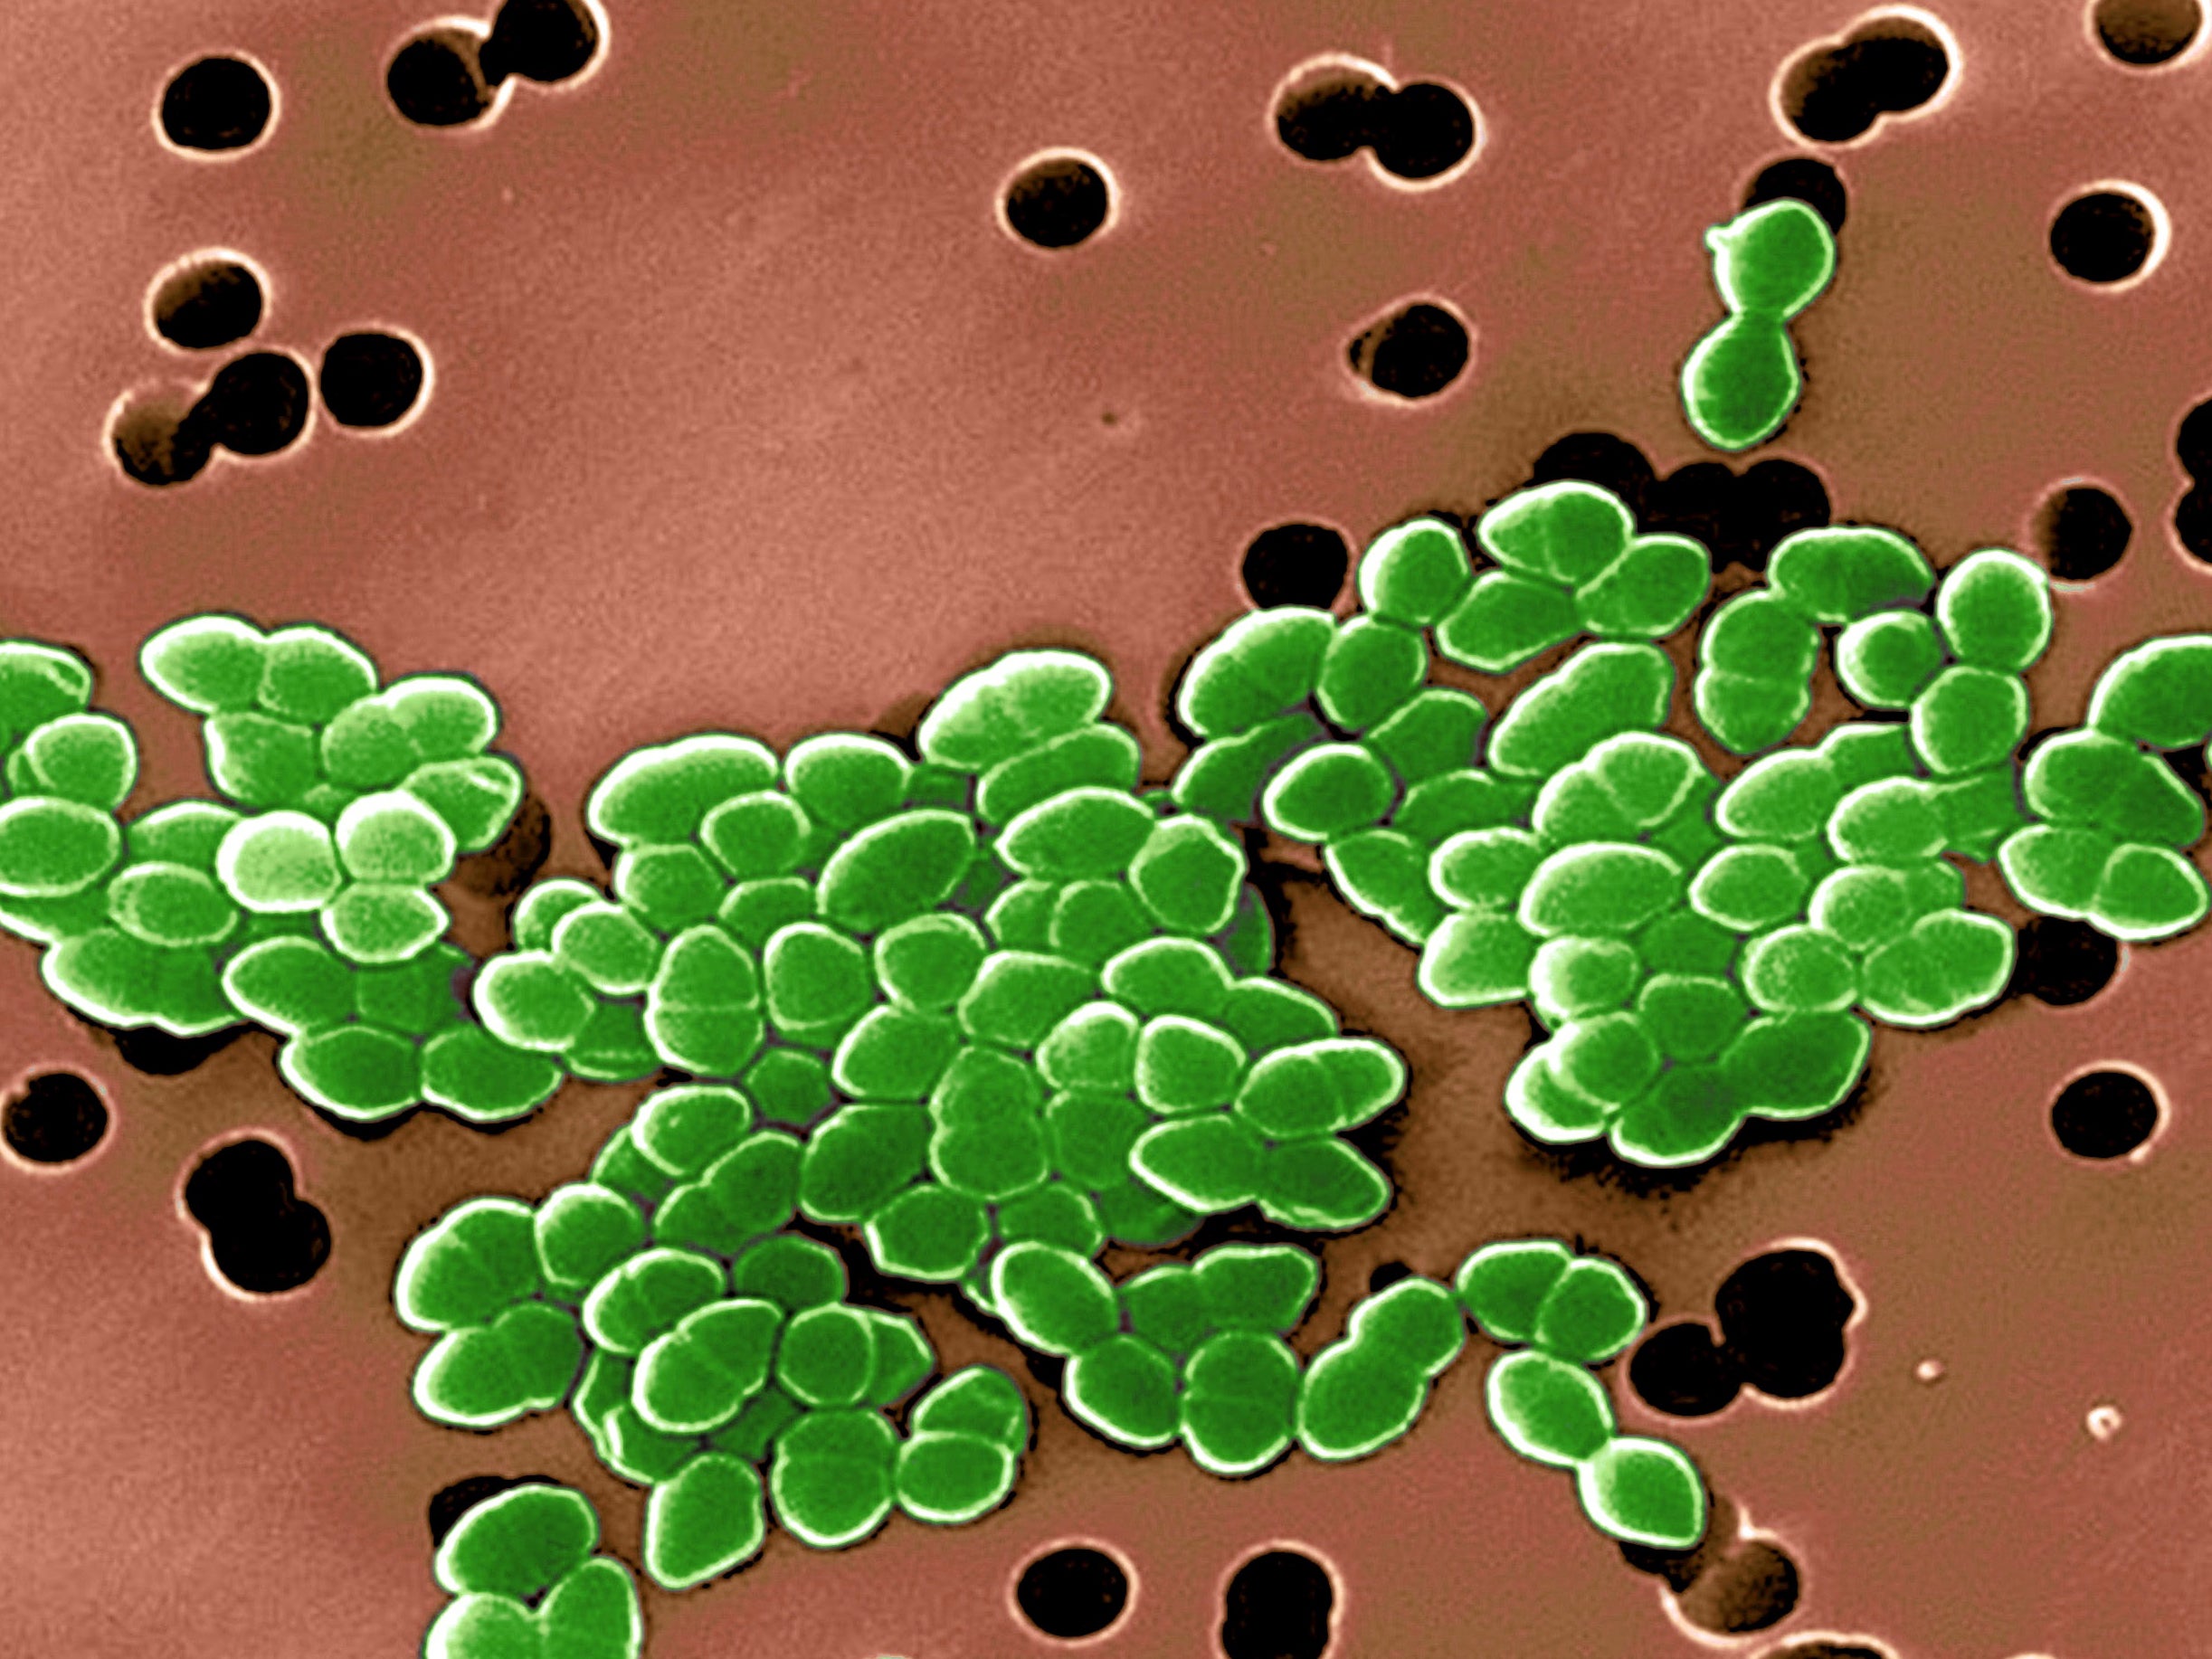 Color enhanced scanning electron micrograph of Vancomycin Resistant Enterococci (VRE). This strain of enterococcus bacteria is resistant to the antibiotic vancomycin. Common infections caused by enterococci are urinary tract inections and wound infections.